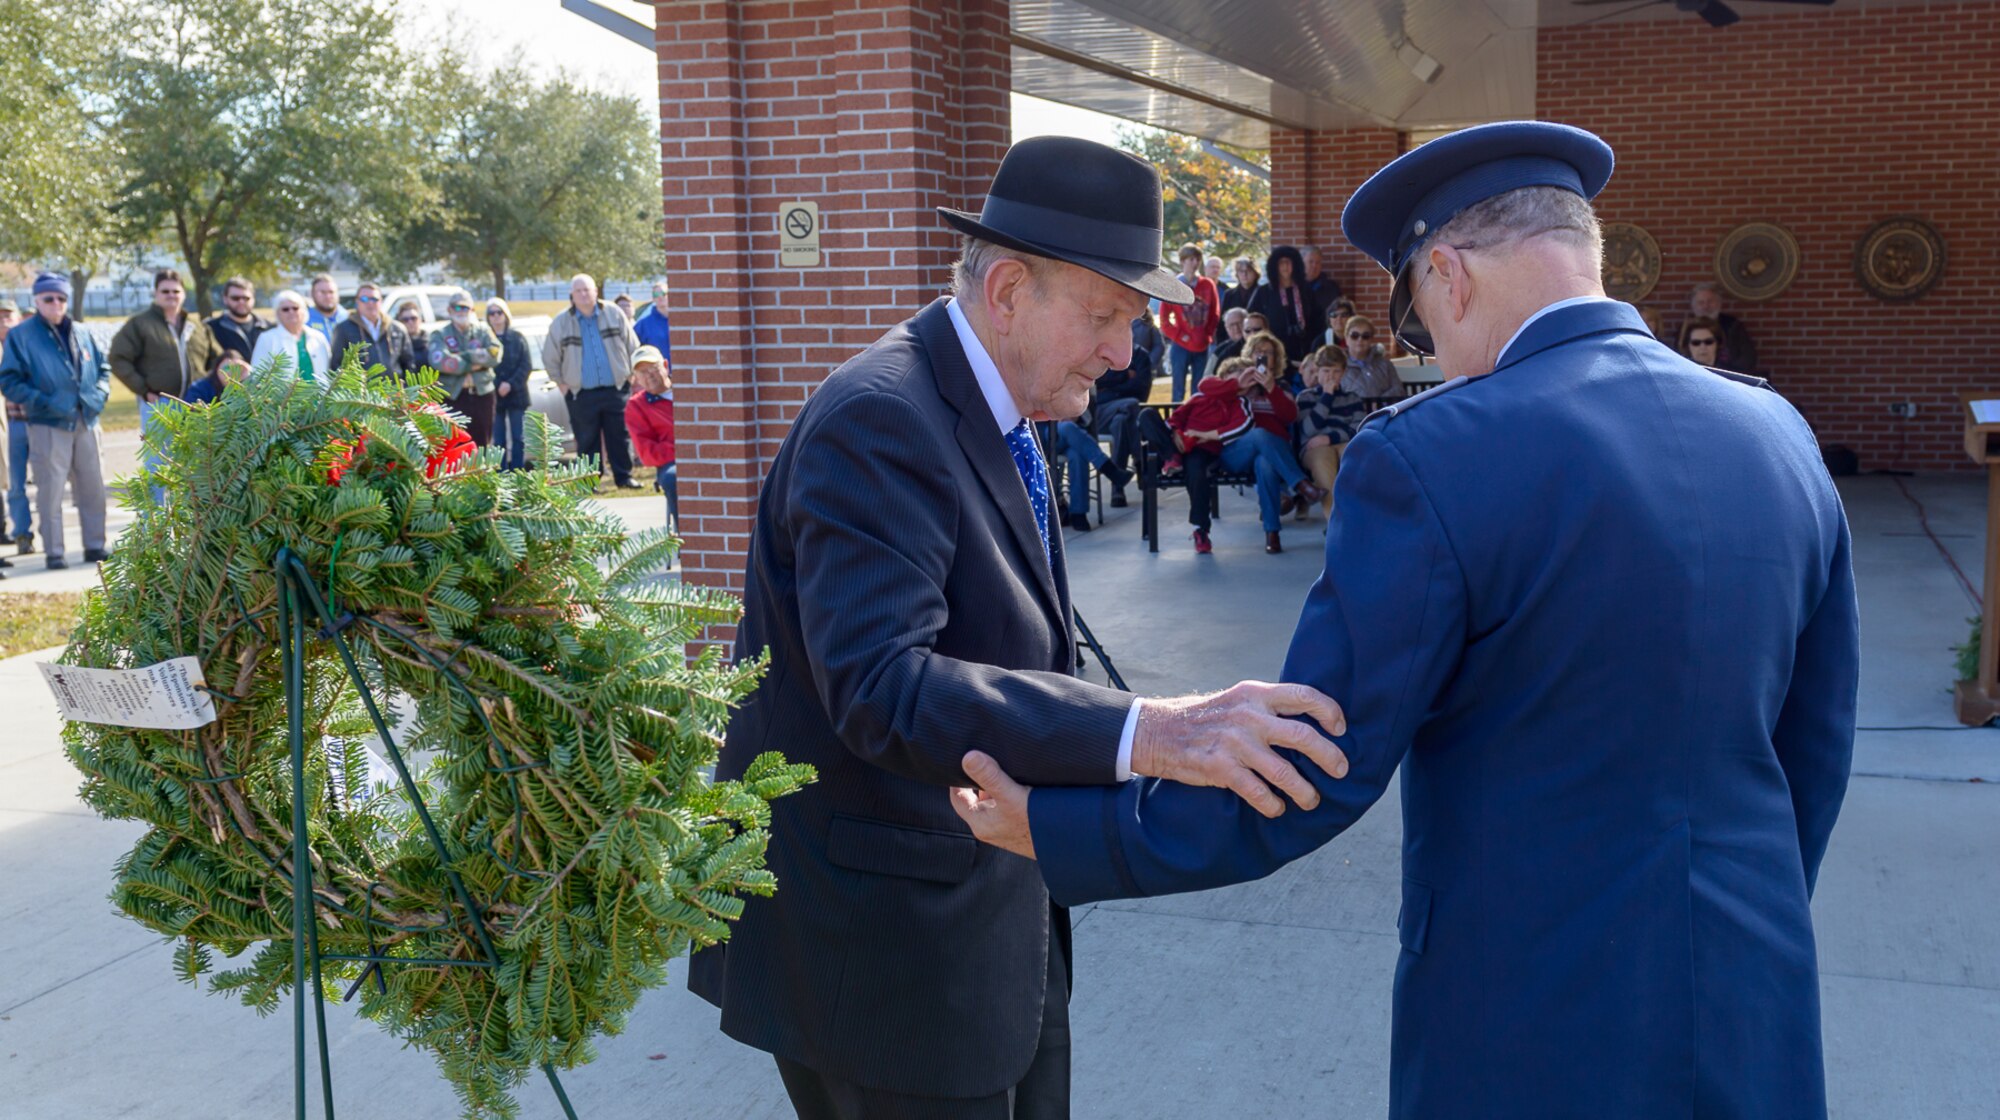 Col. David “Hank” Rogers, Civil Air Patrol commander, assists Victor Mavar, U.S. Merchant Marine and Korean War veteran, during the Wreaths Across America ceremony at the Biloxi National Cemetery Dec. 16, 2017, in Biloxi, Mississippi. Wreaths Across America, a non-profit organization, was formed as an extension of the Arlington Wreath Project. The Arlington Wreath program was started by Morrill Worcester in 1992 with the donation and laying of 5000 Christmas wreaths to Arlington National Cemetery. (U.S. Air Force photo by André Askew)